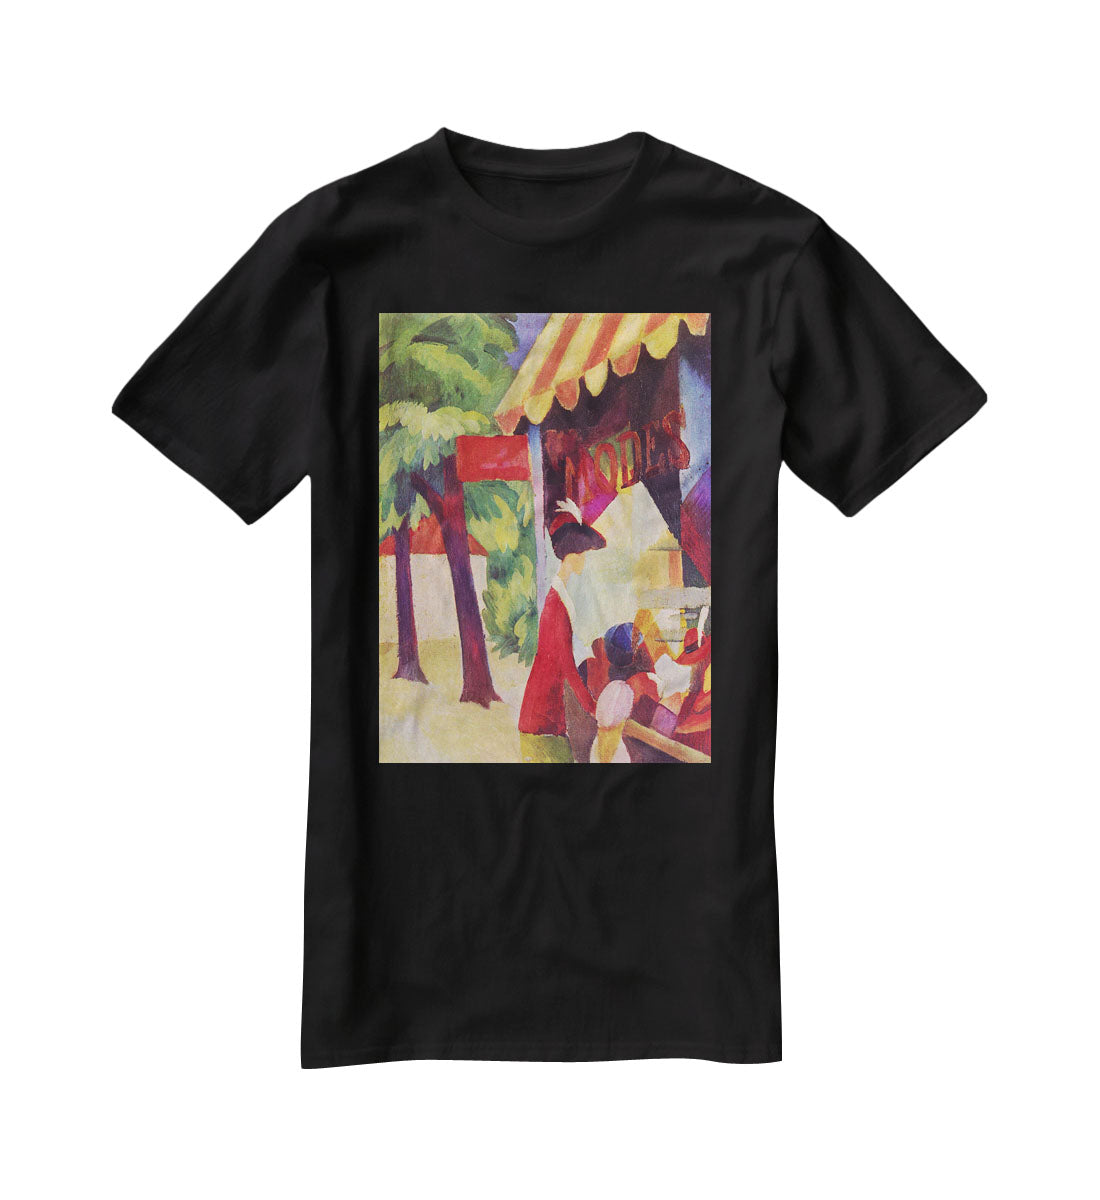 Before Hutladen woman with a red jacket and child by Macke T-Shirt - Canvas Art Rocks - 1